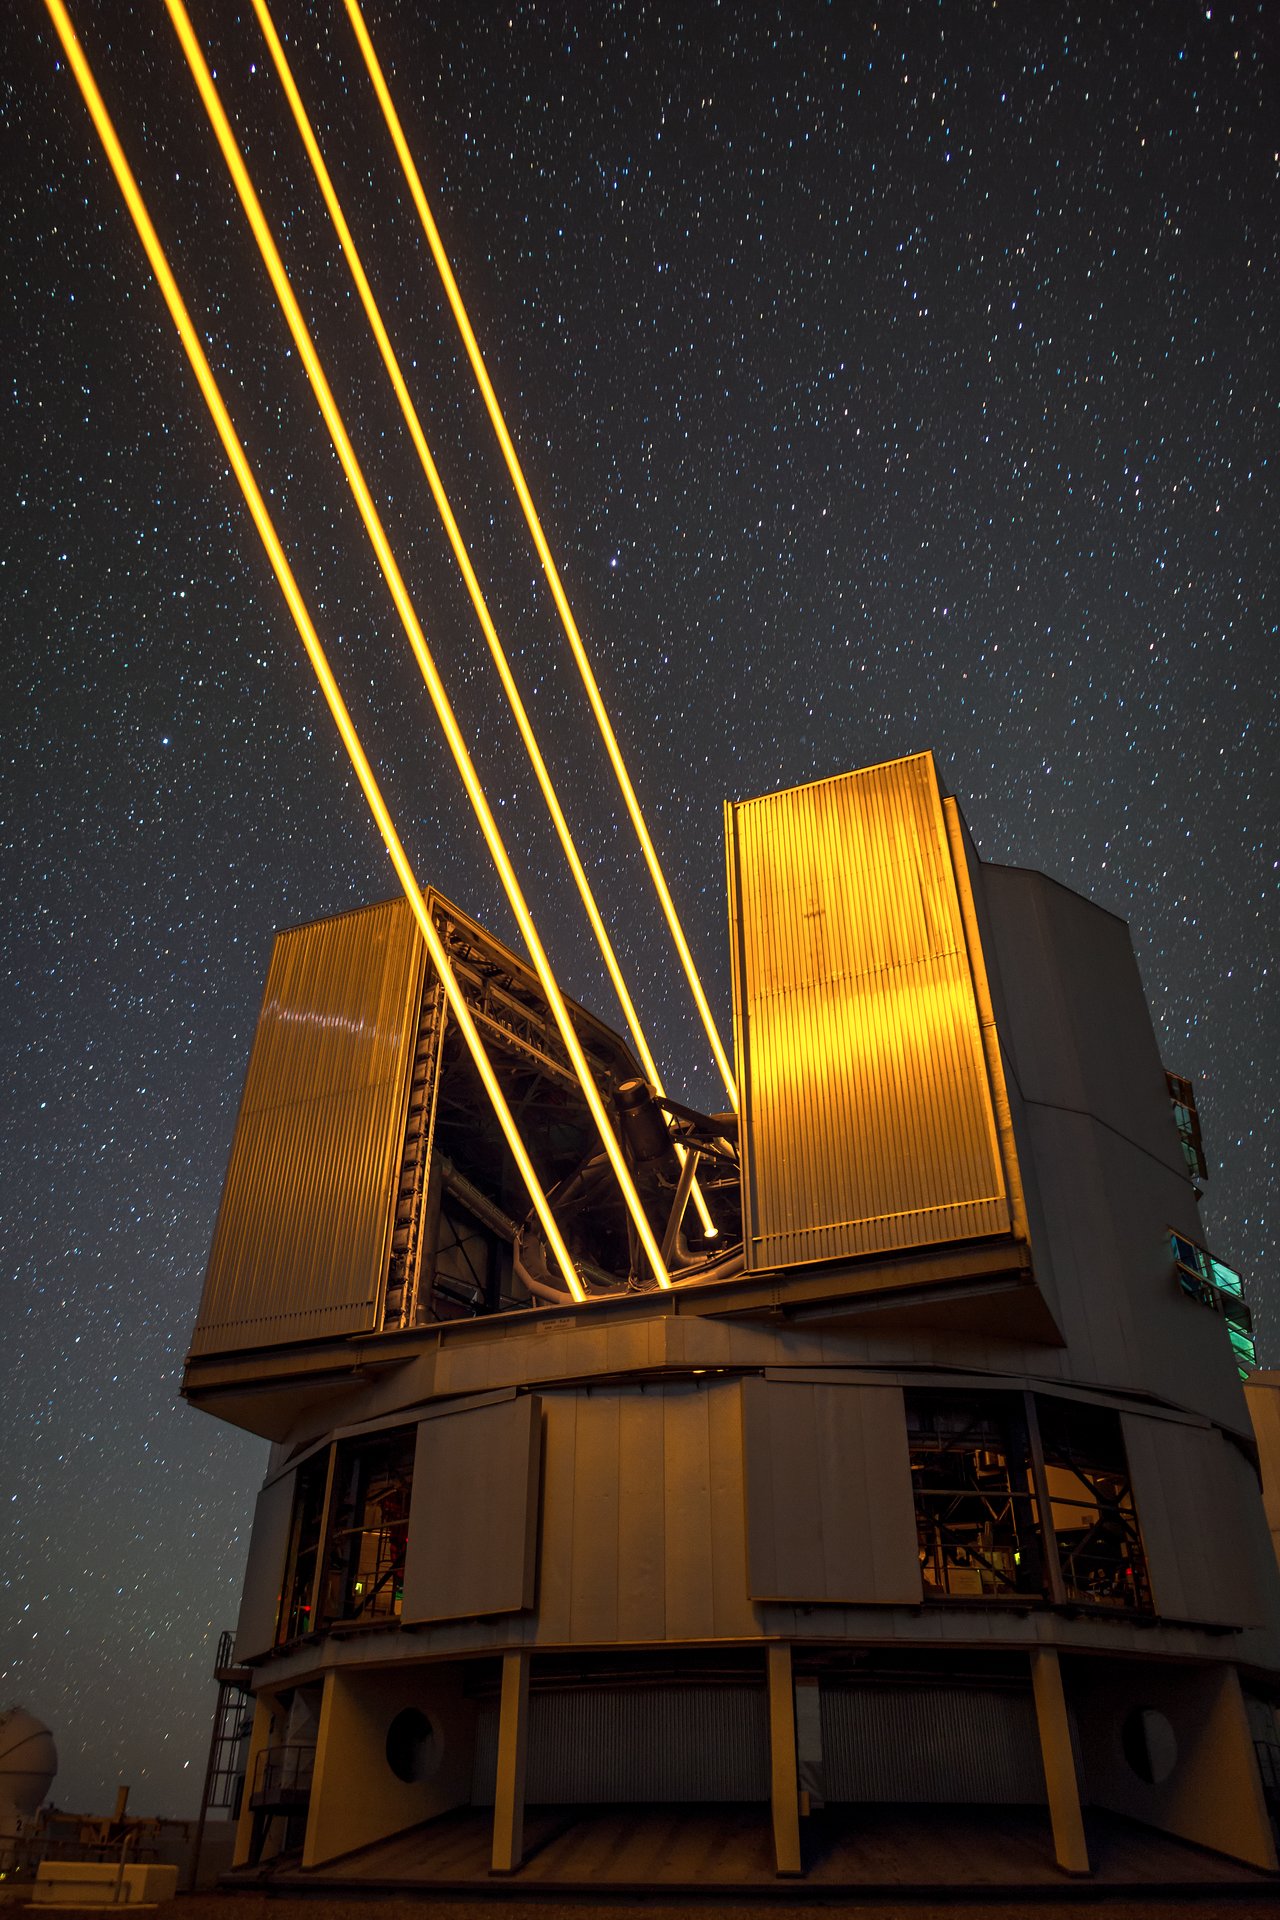 4LGSF at UT4 of the Very Large Telescope